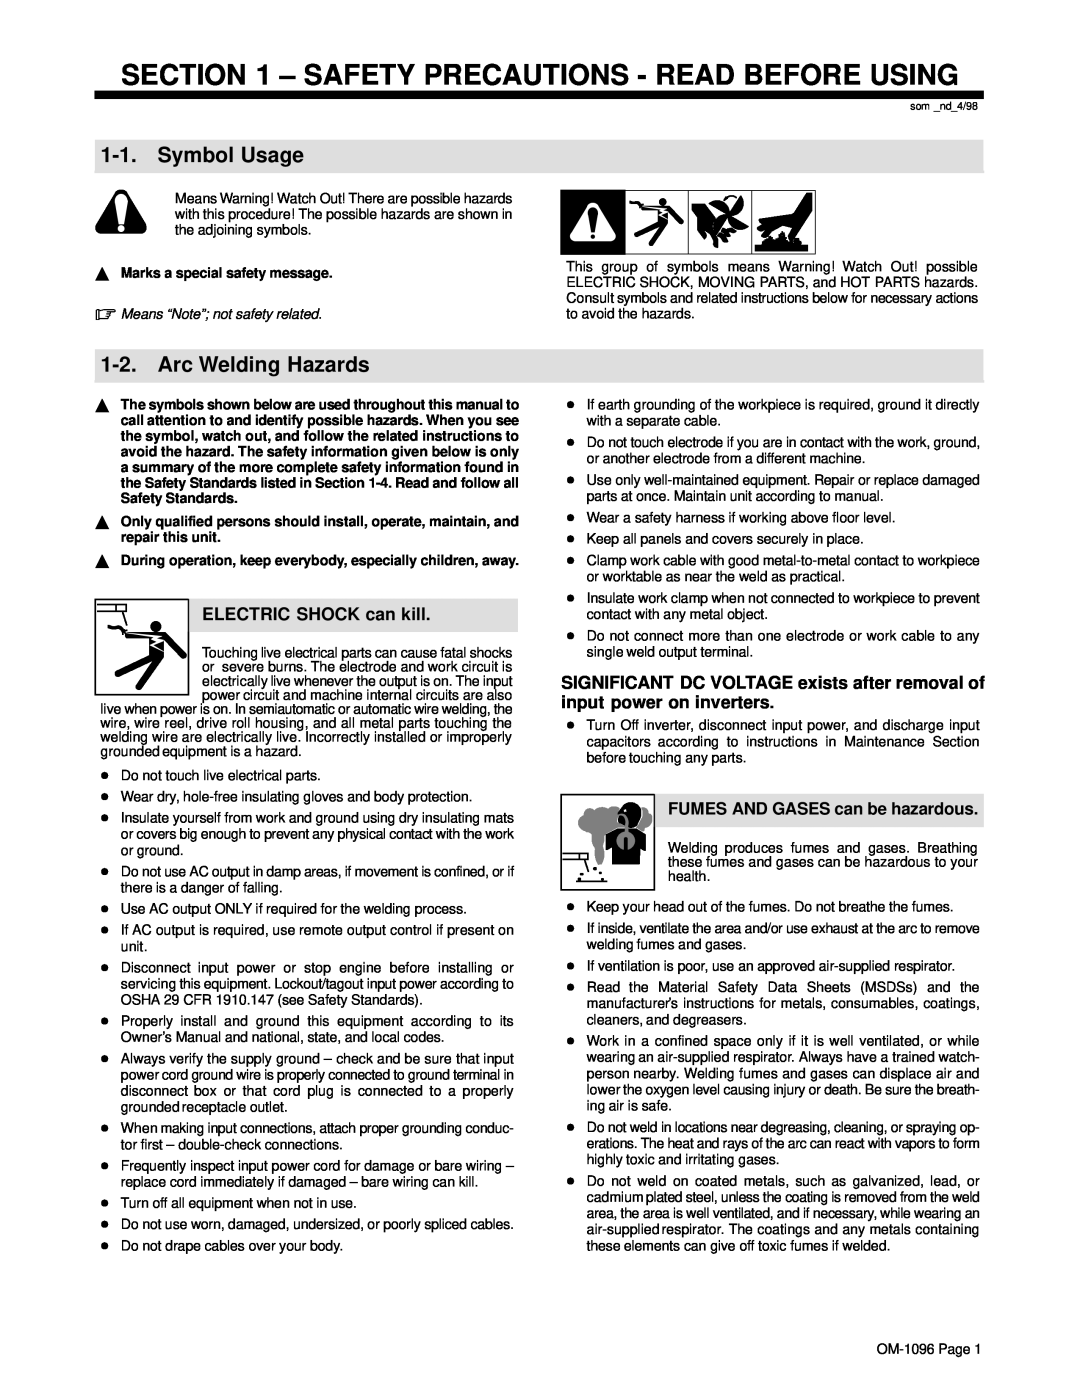 Miller Electric MSC-2 Symbol Usage, Arc Welding Hazards, Safety Precautions - Read Before Using, ELECTRIC SHOCK can kill 